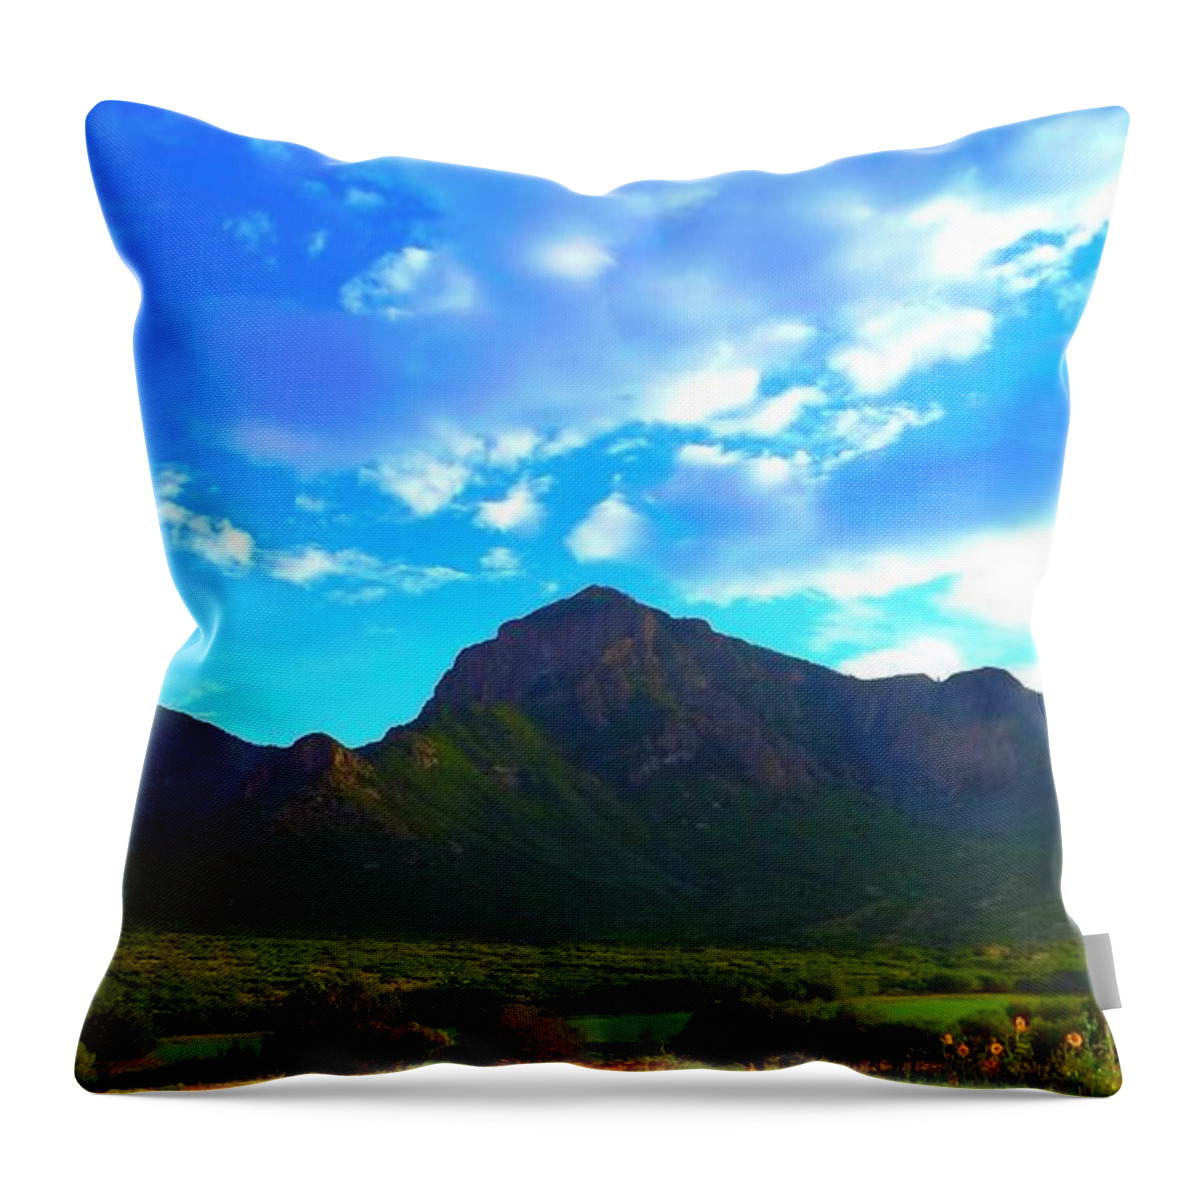 Unaweep Mountains Throw Pillow featuring the digital art Unaweep Mountains by Annie Gibbons